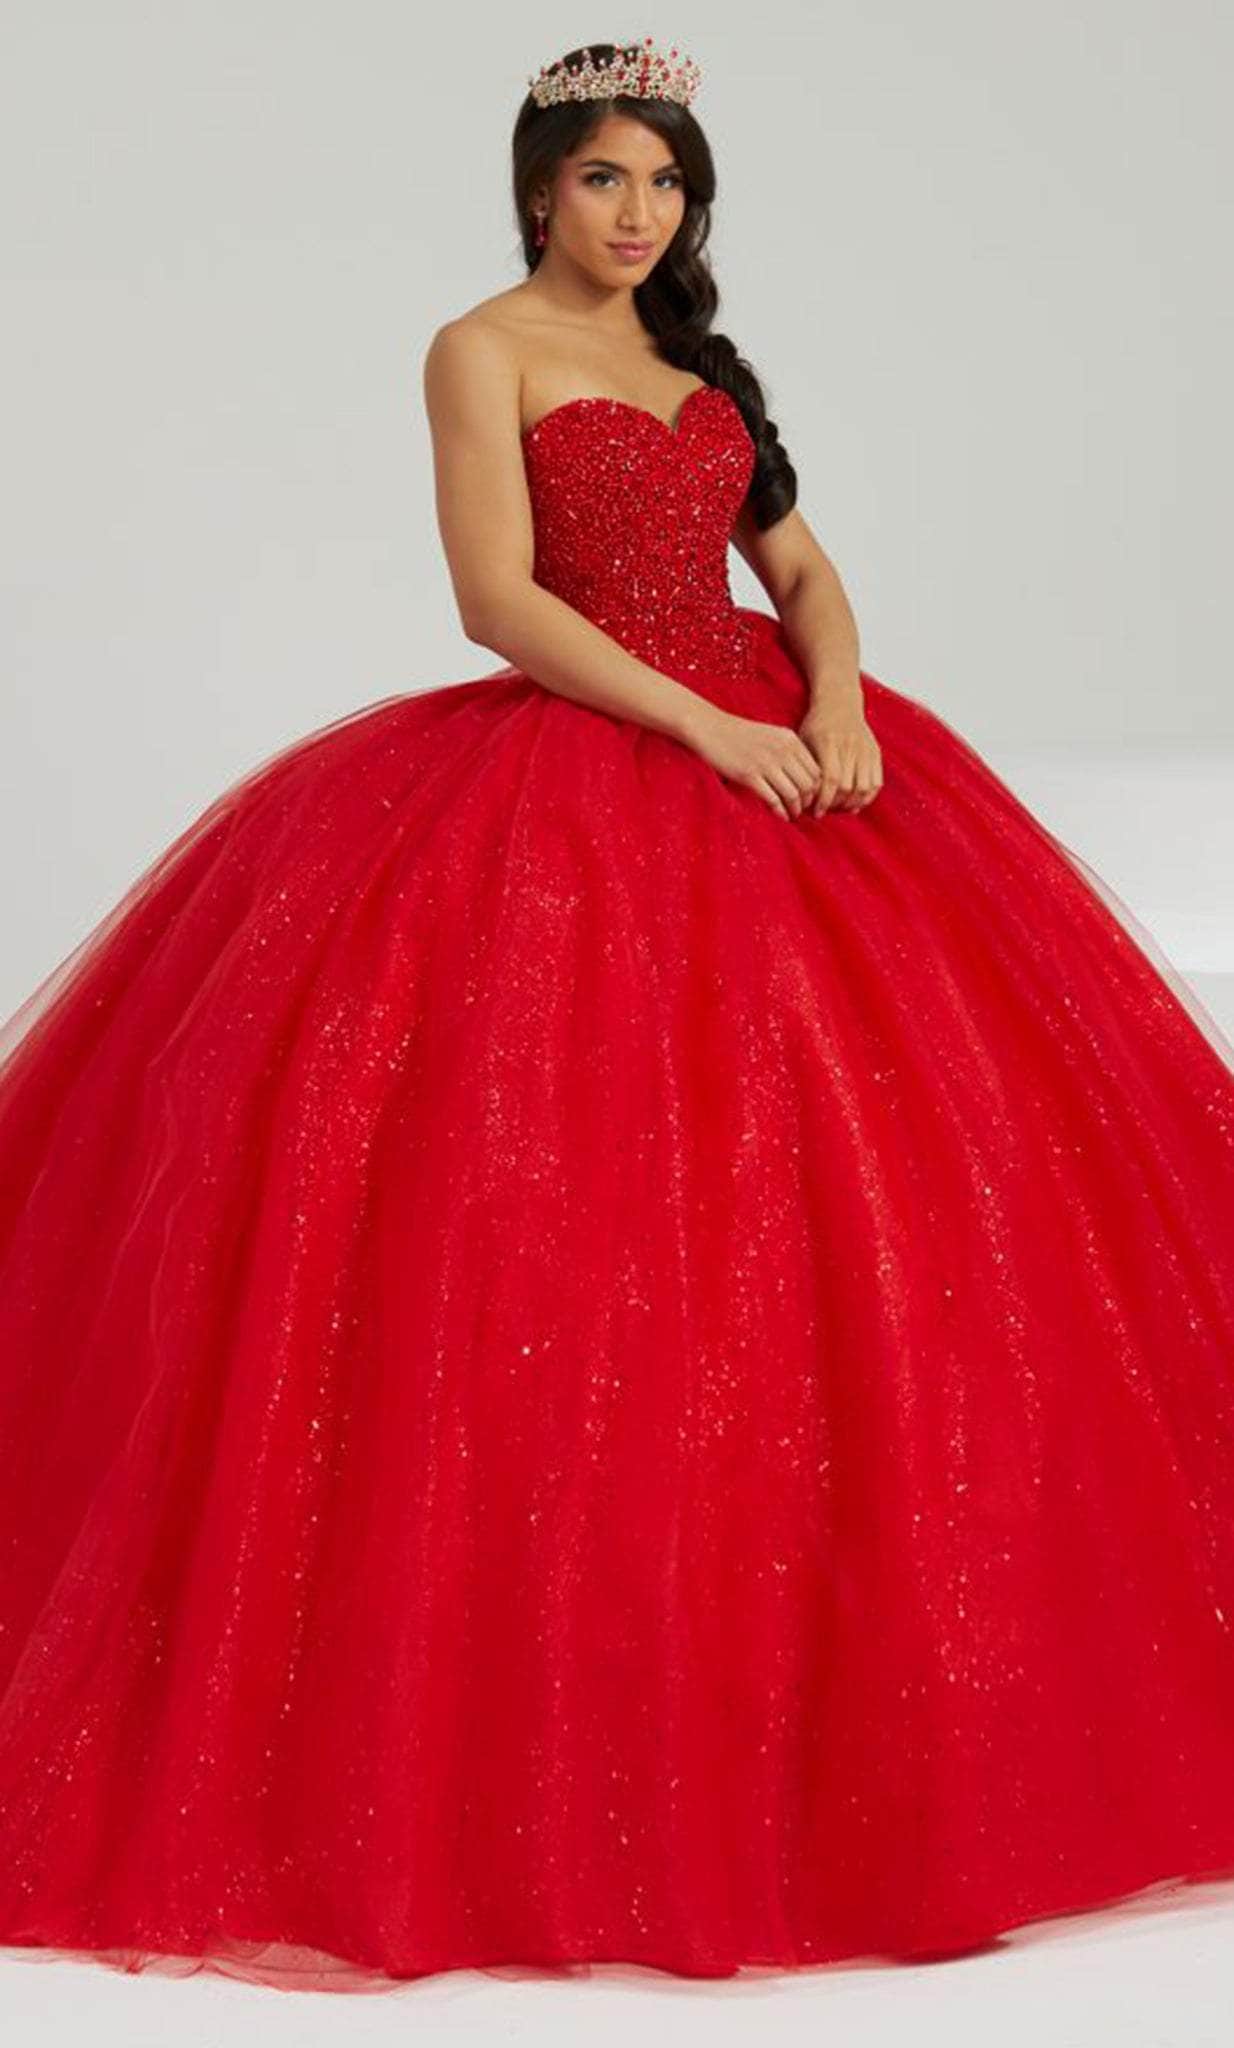 Image of Fiesta Gowns 56480 - Cape-Infused Sweetheart Glittered Gown